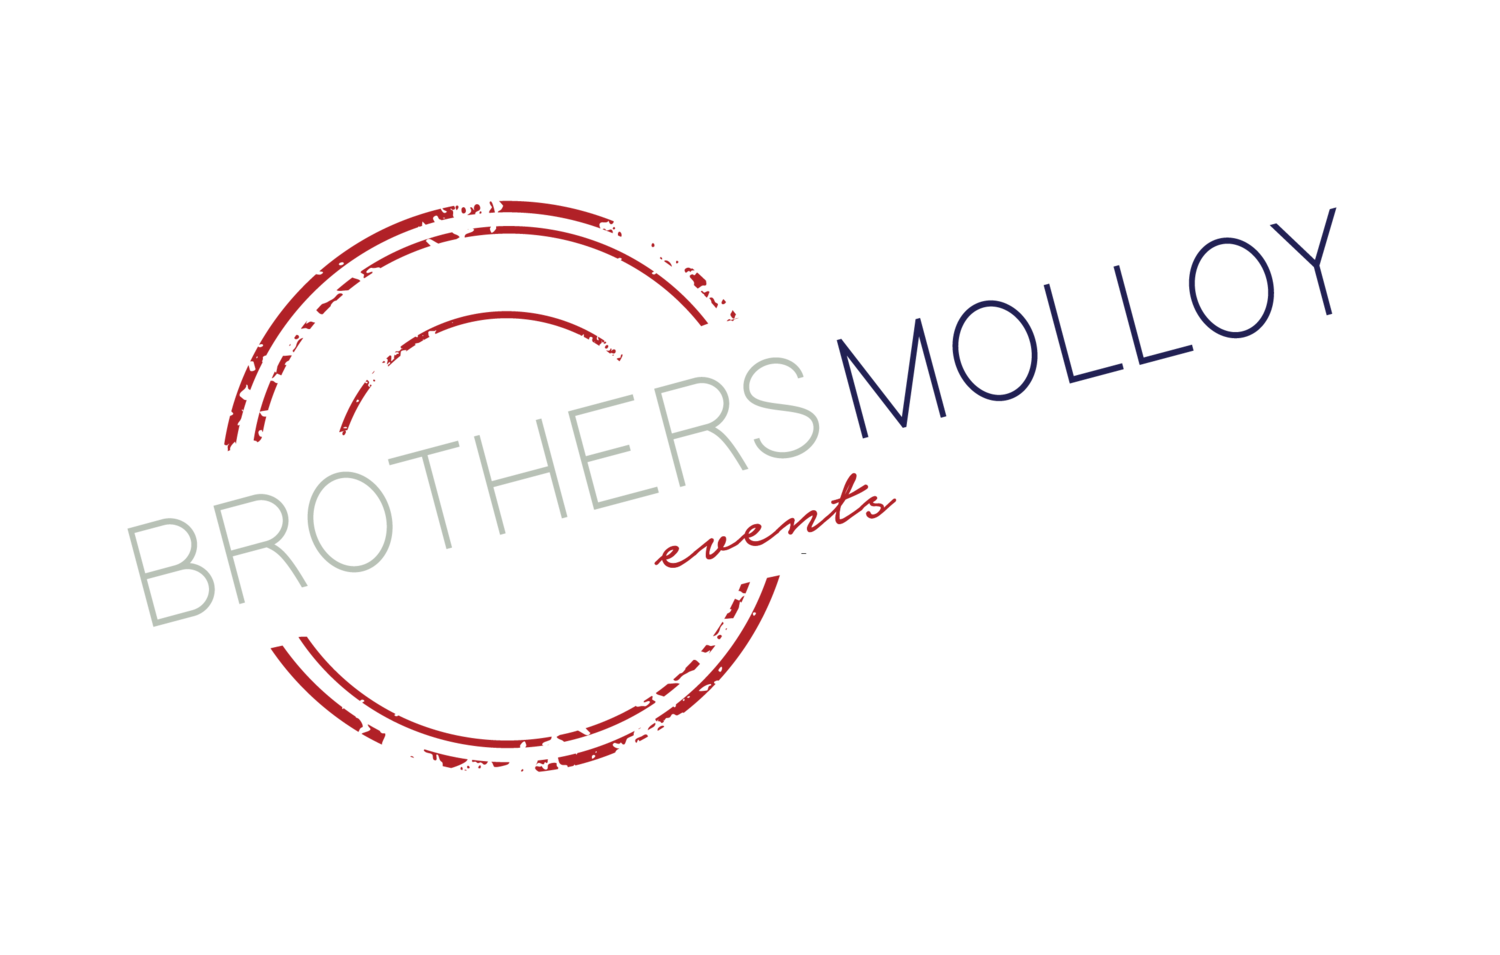 Brothers Molloy Events